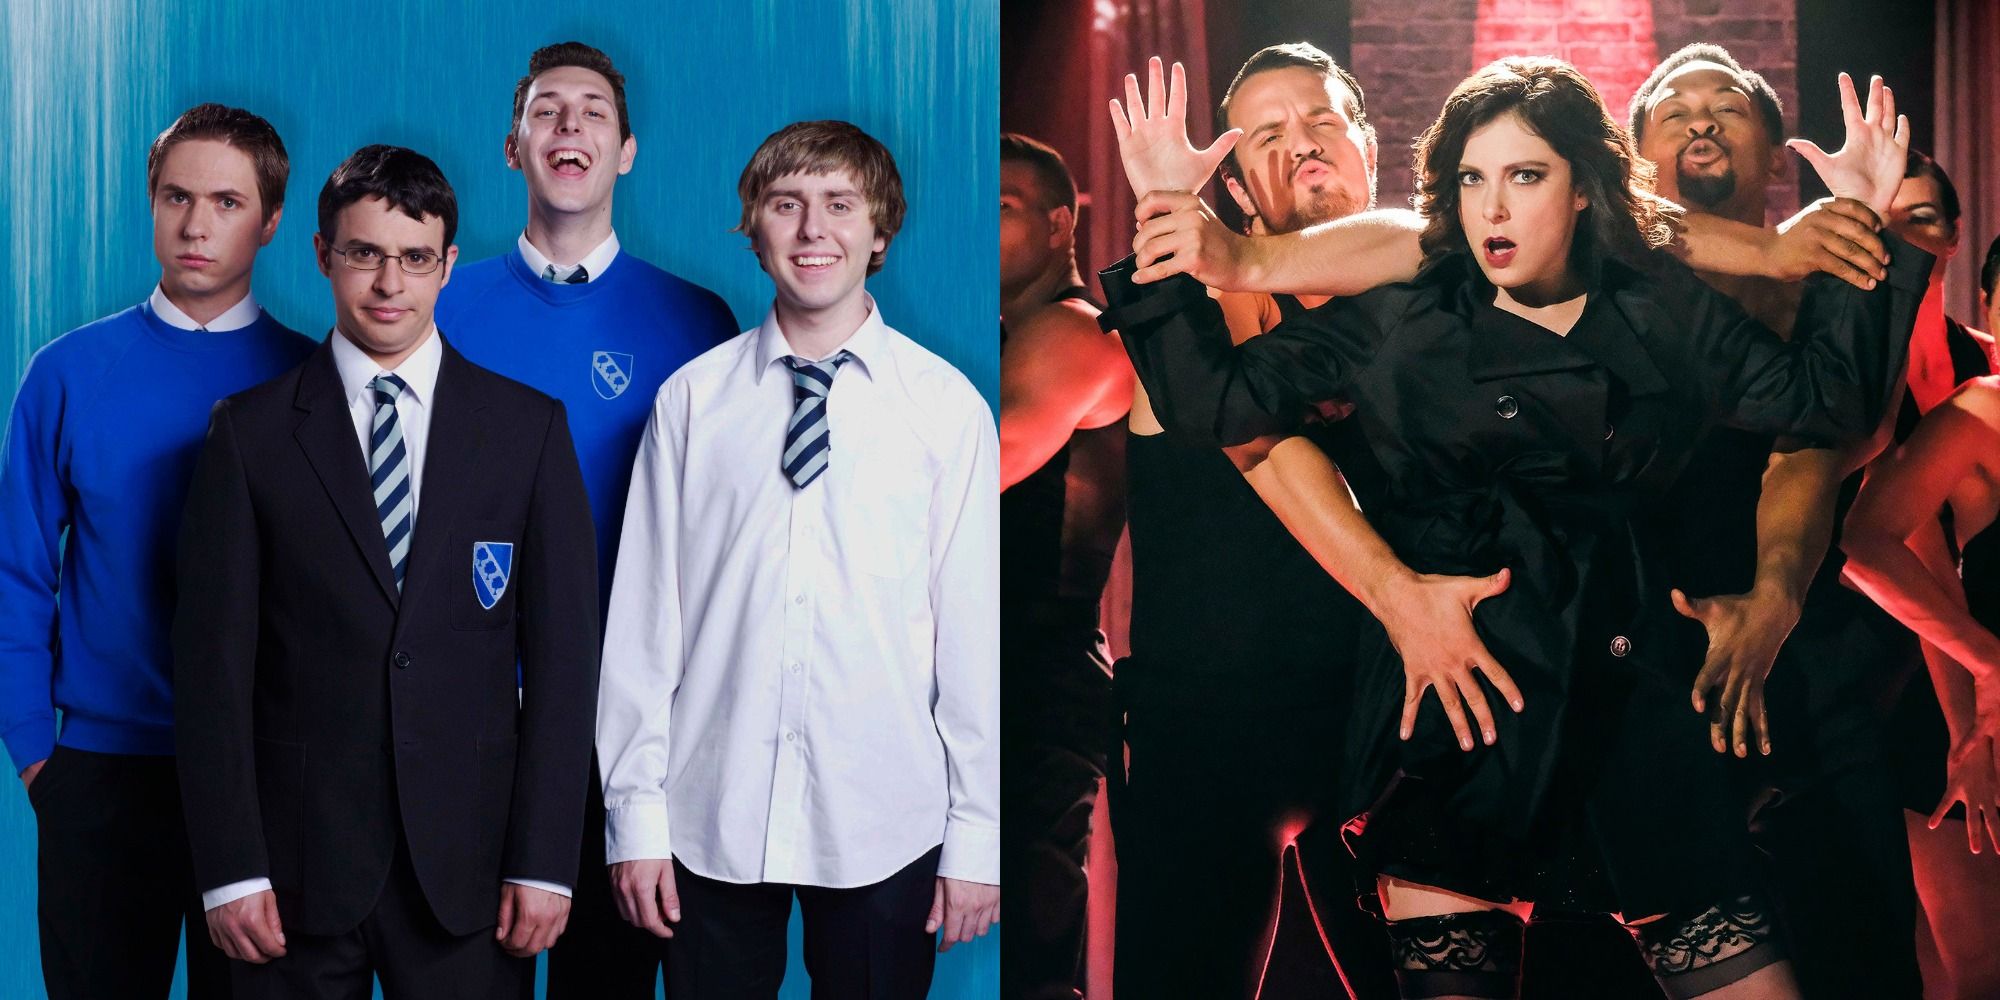 Split image showing characters from The Inbetwenners and Crazy Ex-Girlfriend